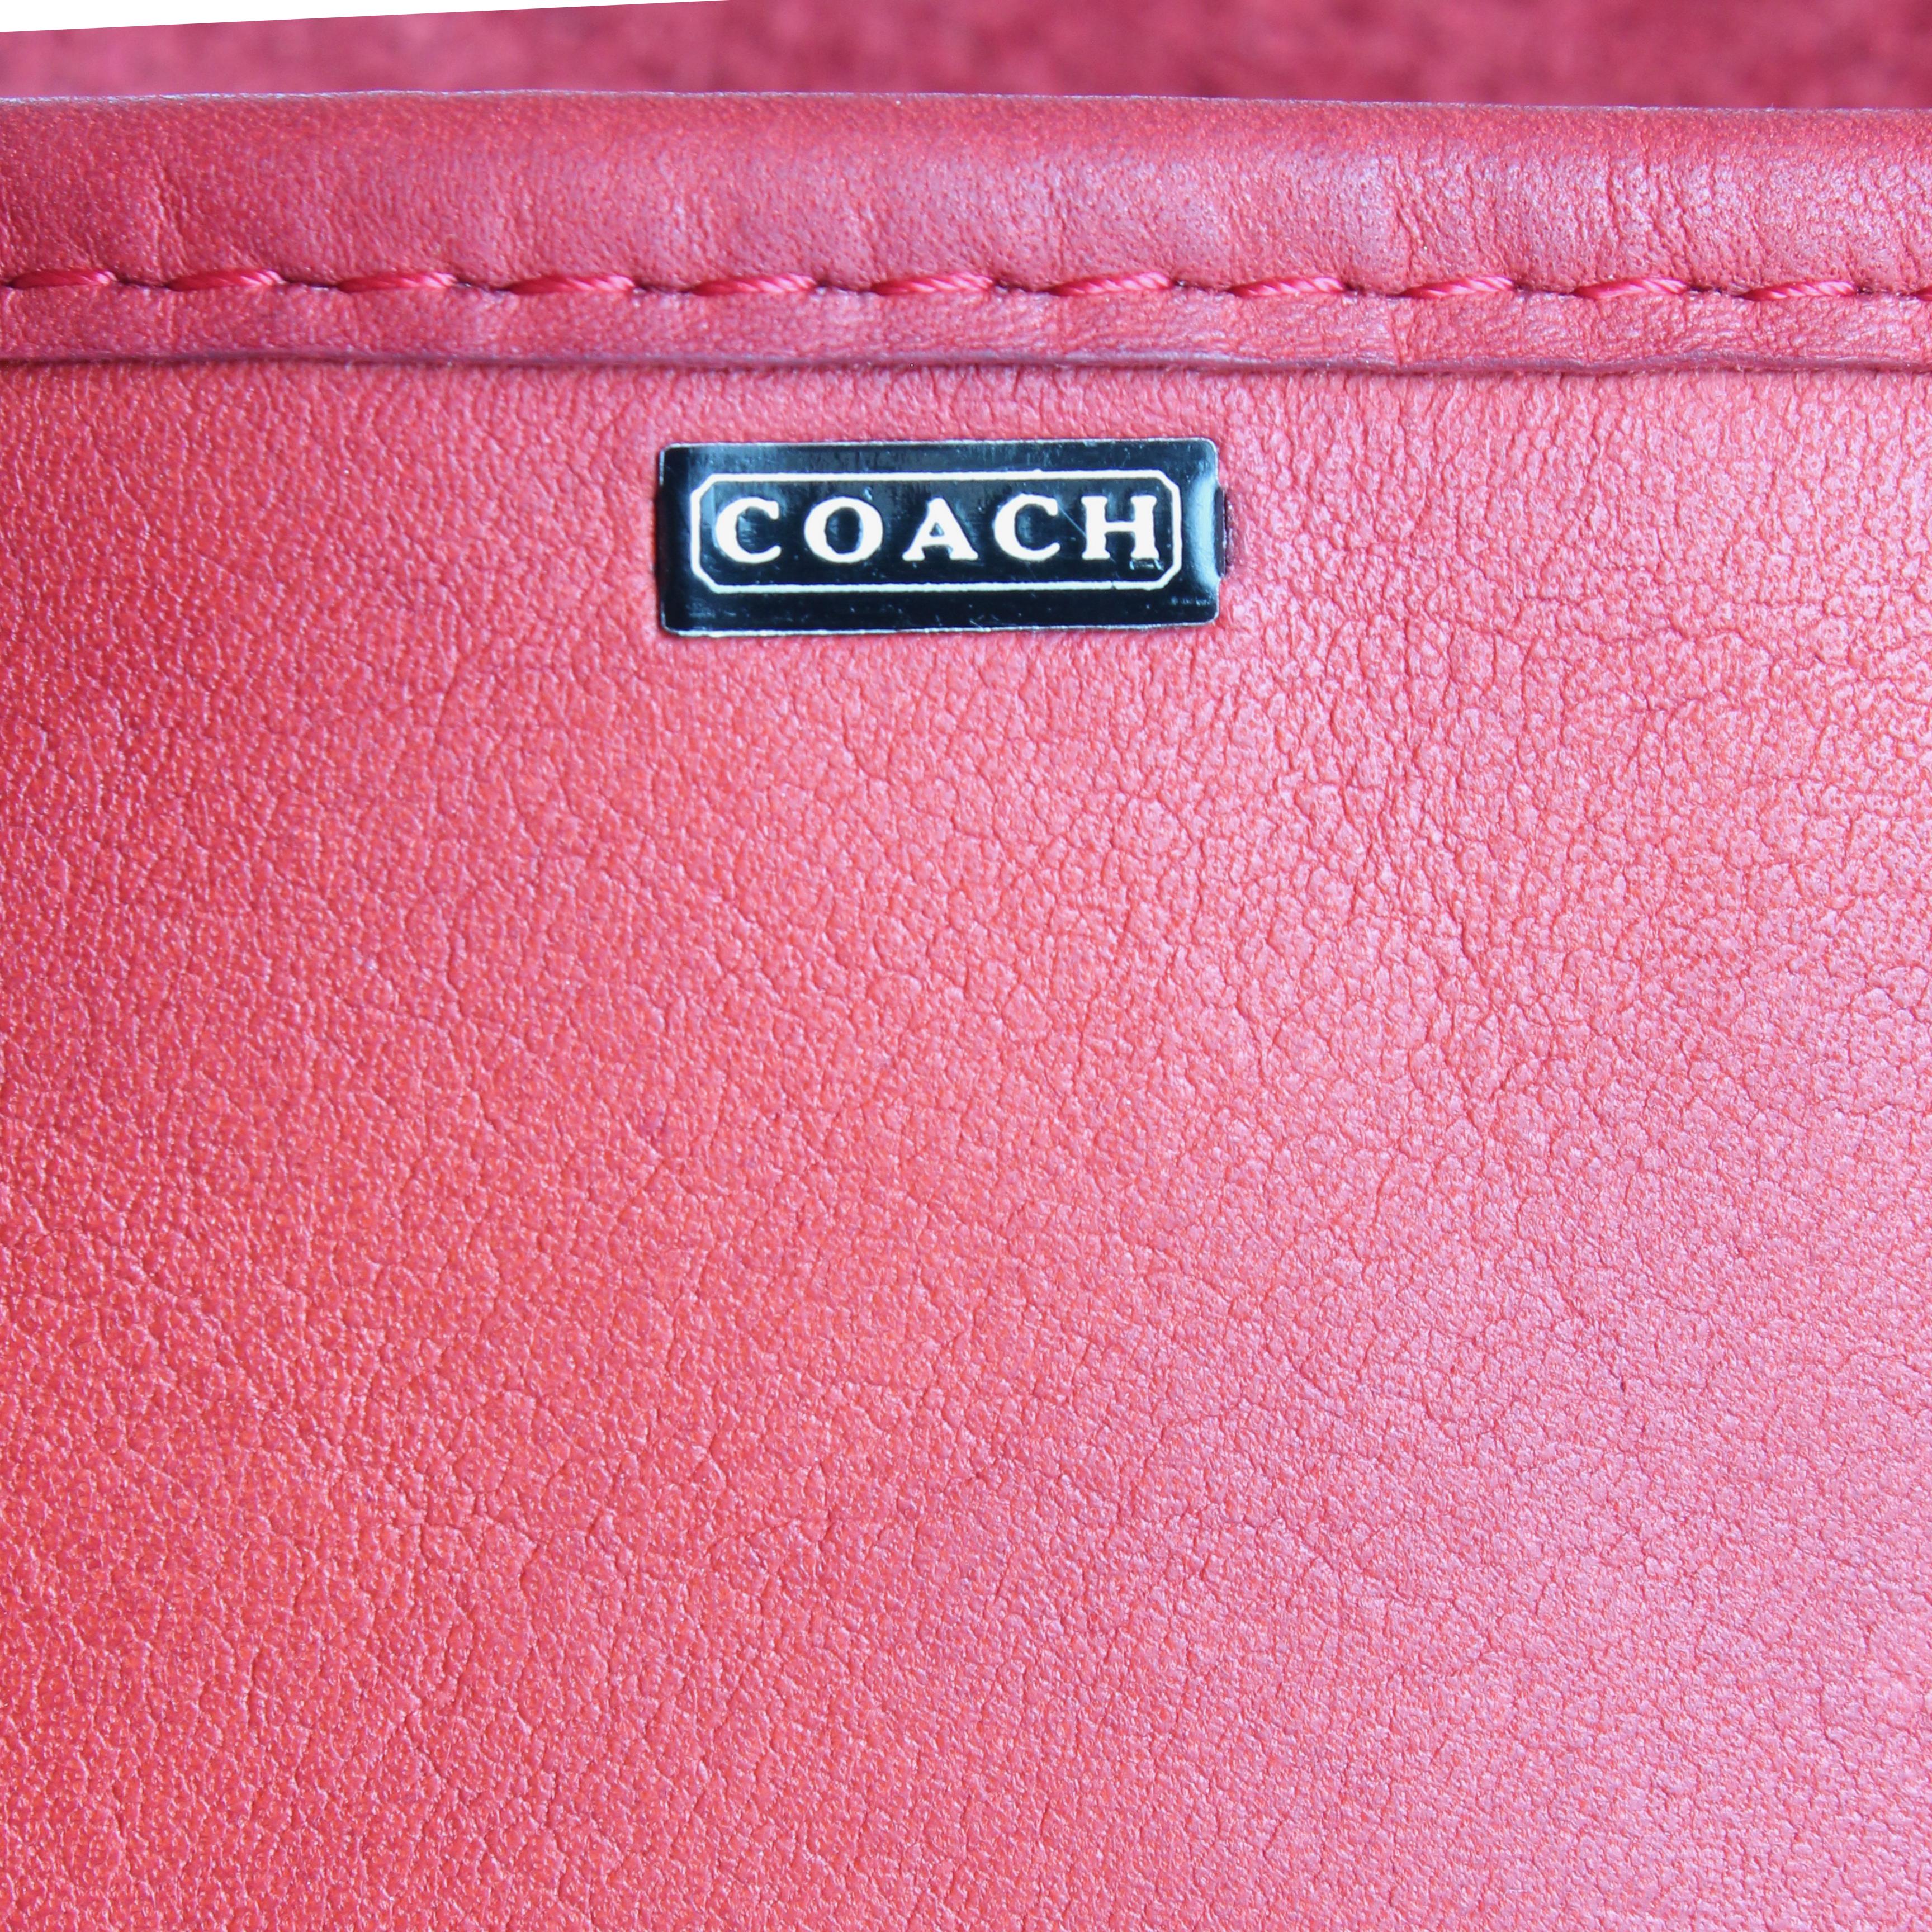 Bonnie Cashin for Coach Bag 2-in-1 Shoulder Pouch Rare Red Leather 1970s HTF For Sale 12